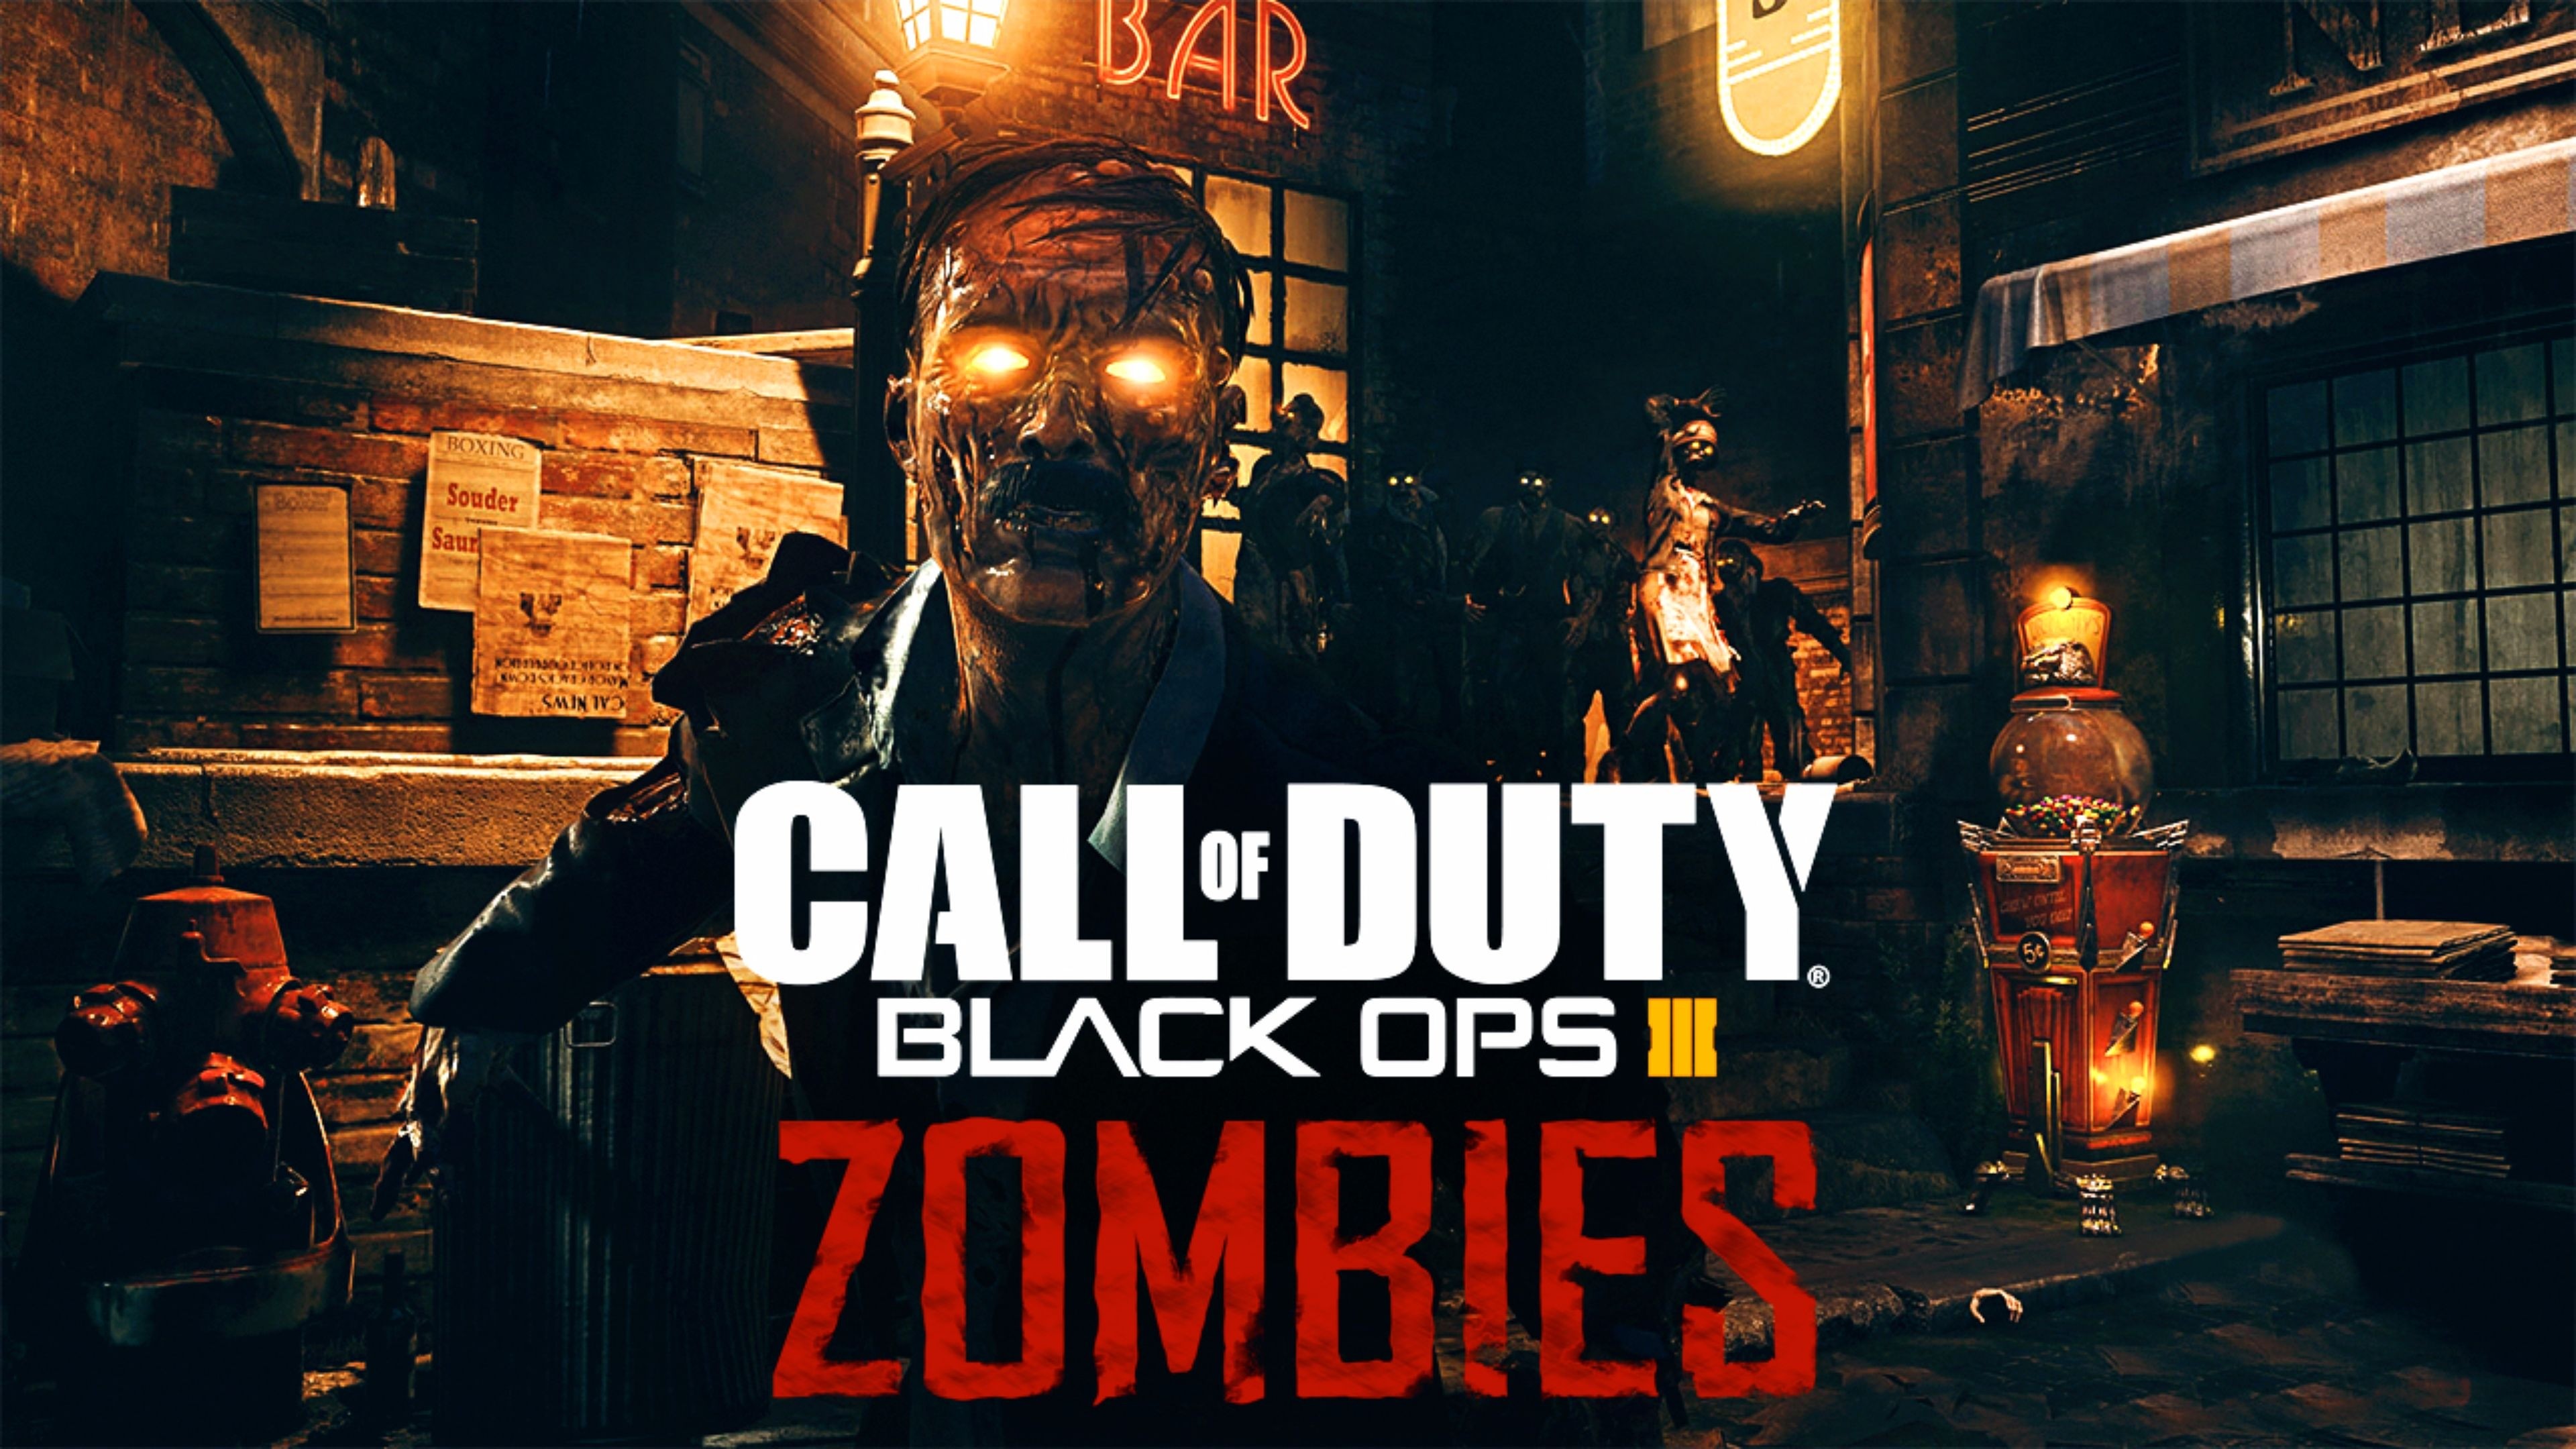 3840x2160 Black Ops 3 Zombies Wallpaper Picture